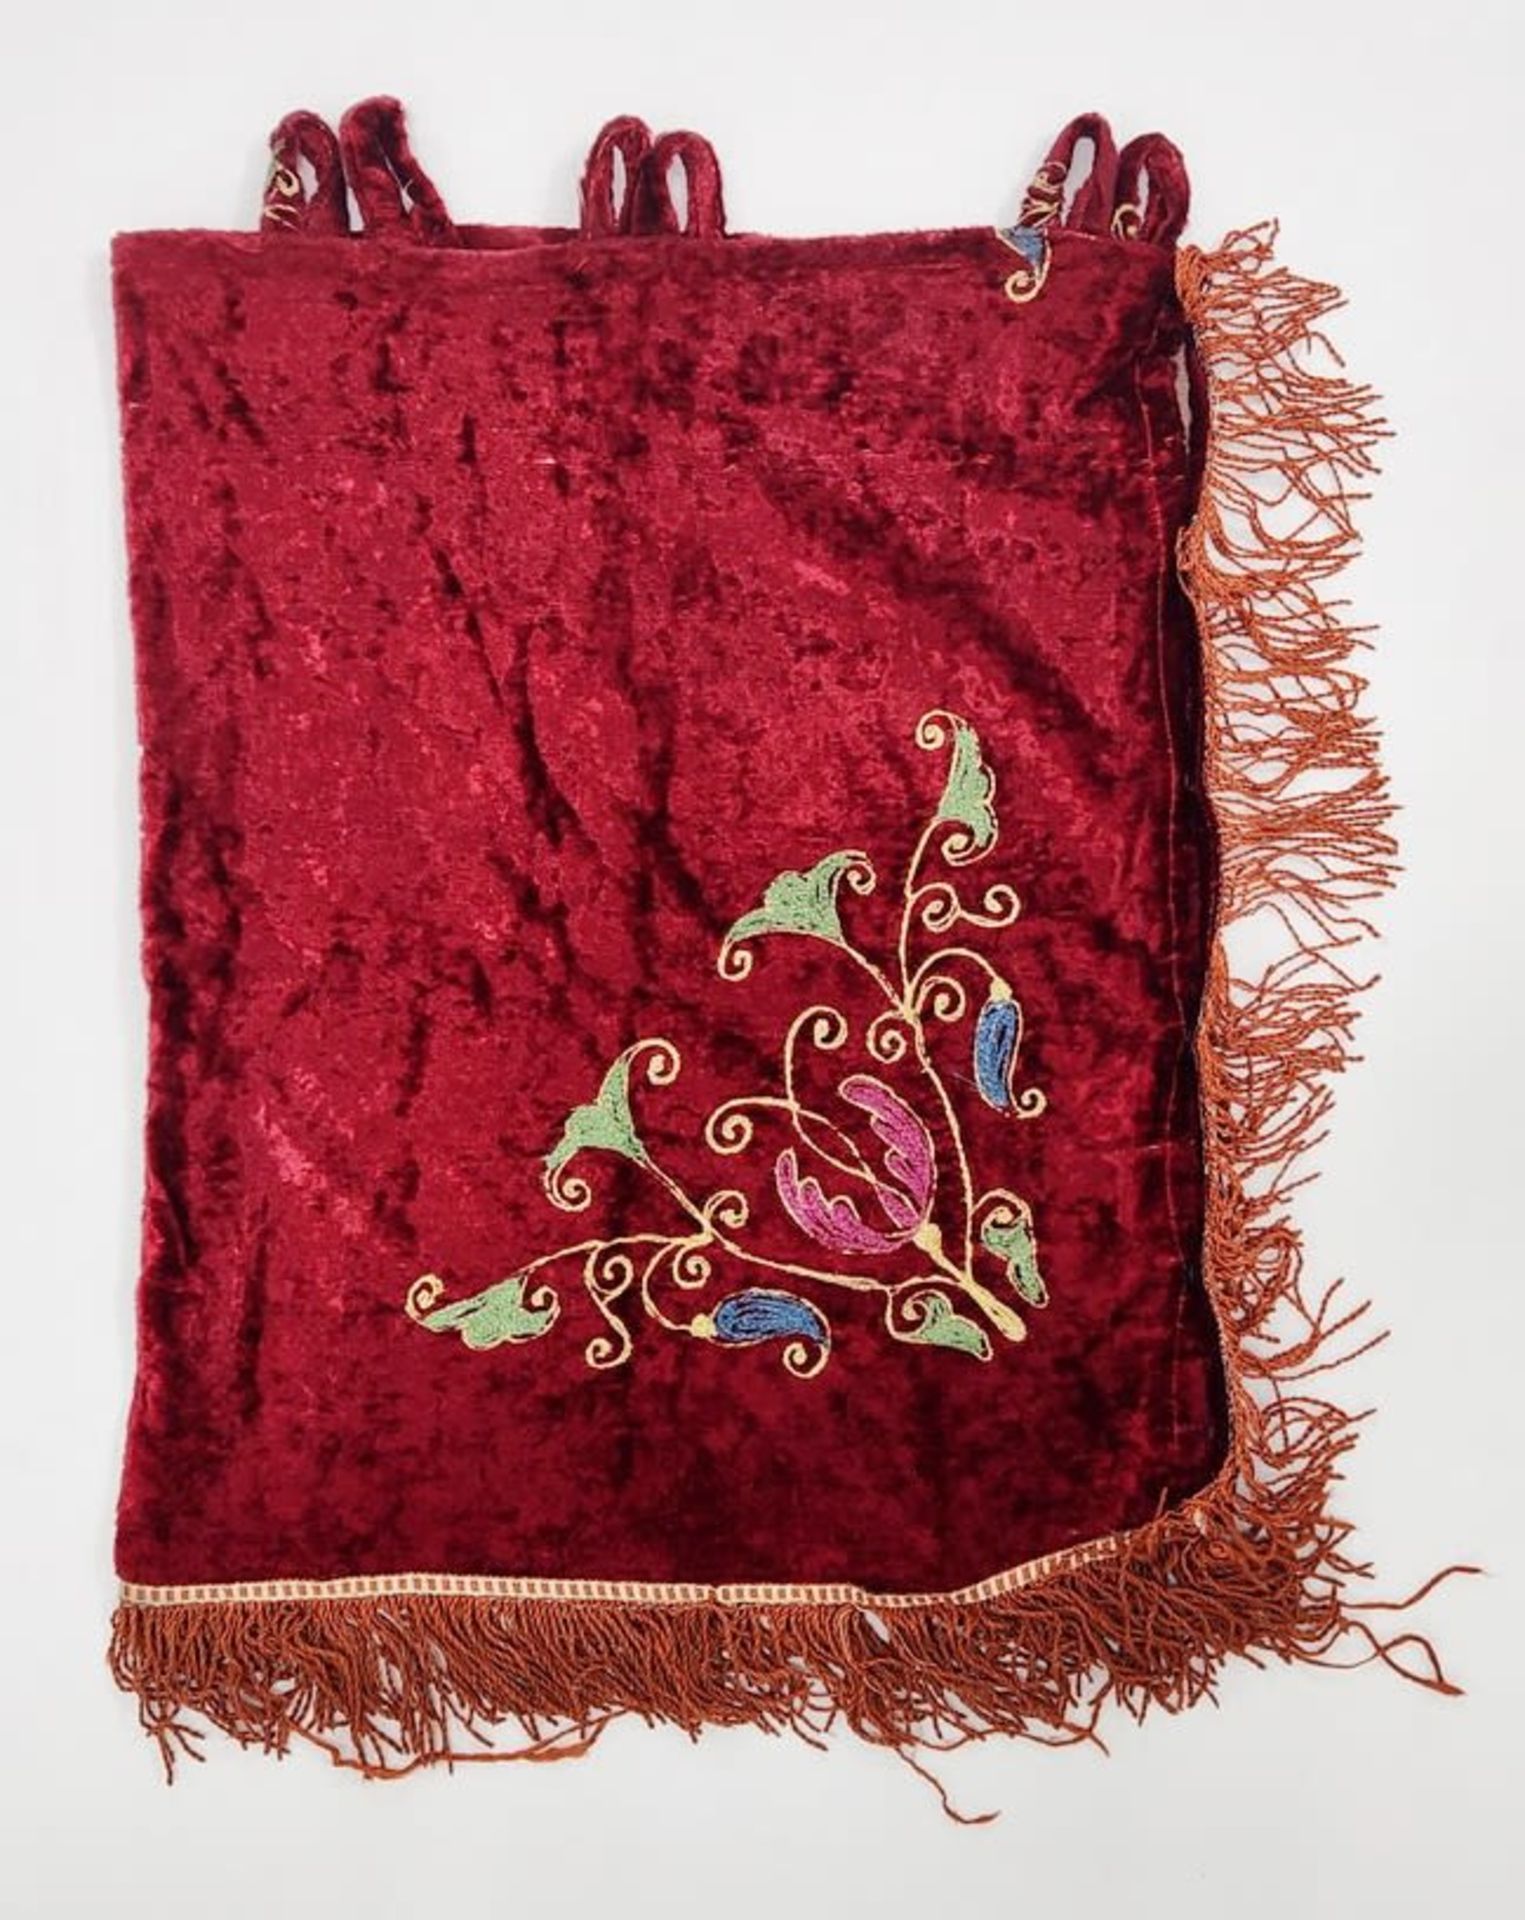 A Torah scroll coat, decorated with cotton thread weaving on red velvet and red fabric strands,